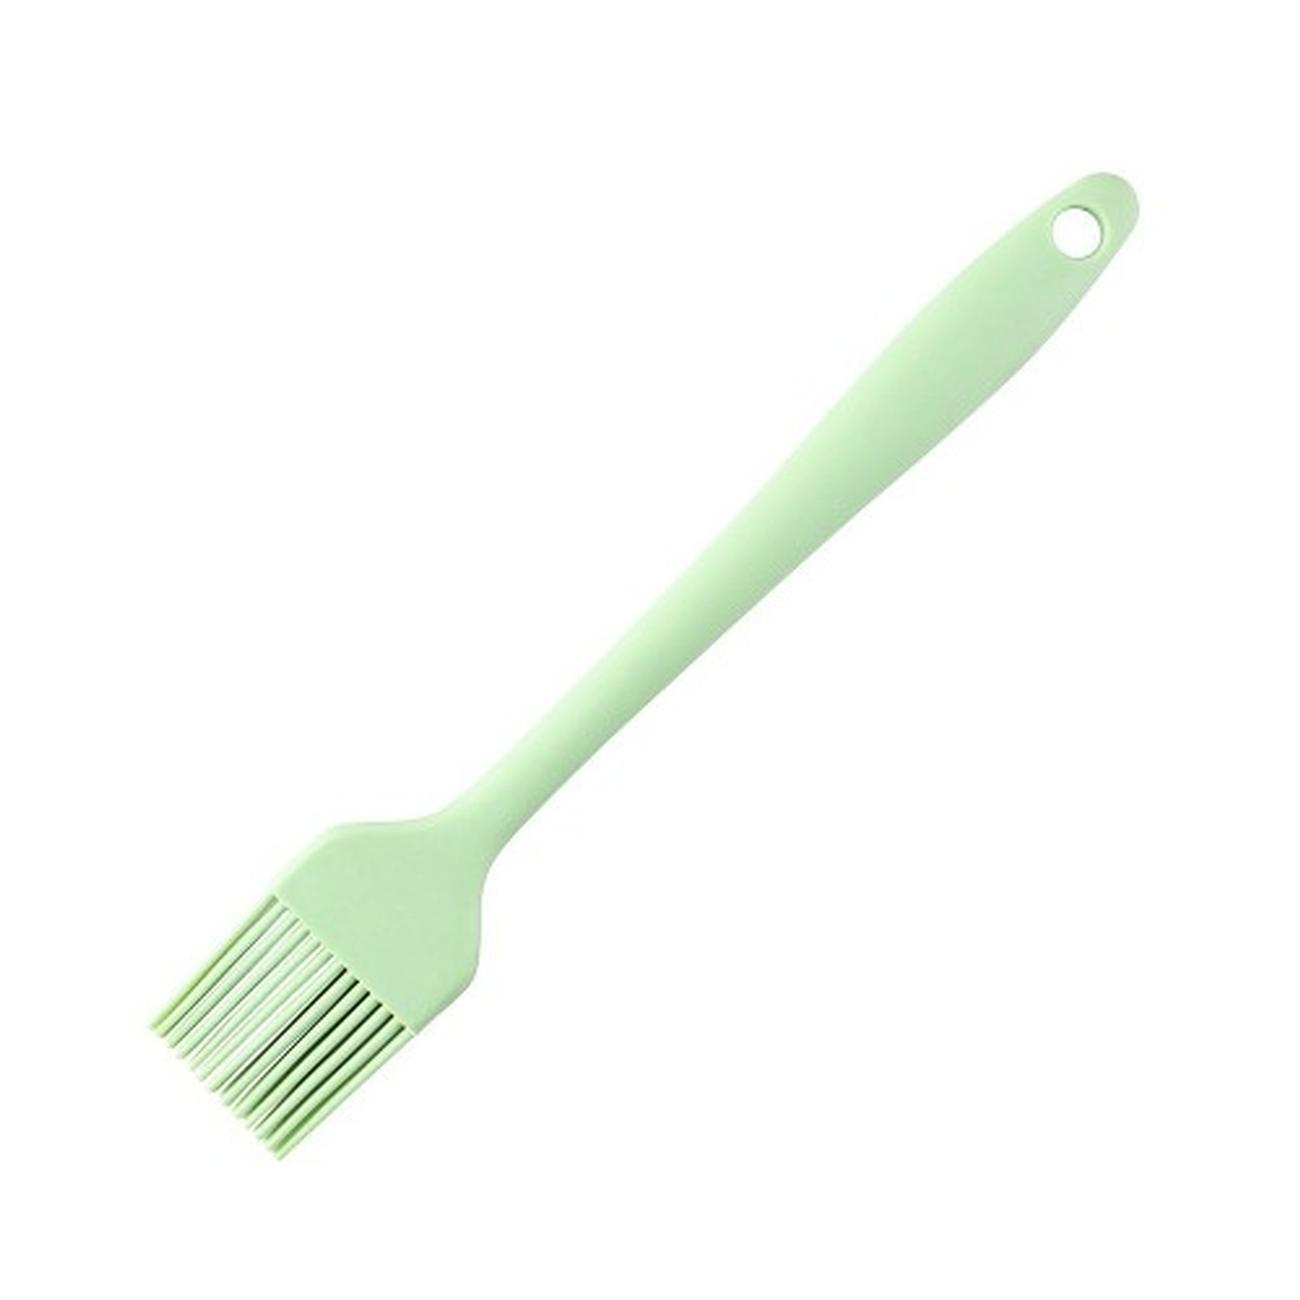 taylors-eye-witness-silicone-pastry-brush-lichen - Taylor's Eye Witness Lichen Silicone Brush